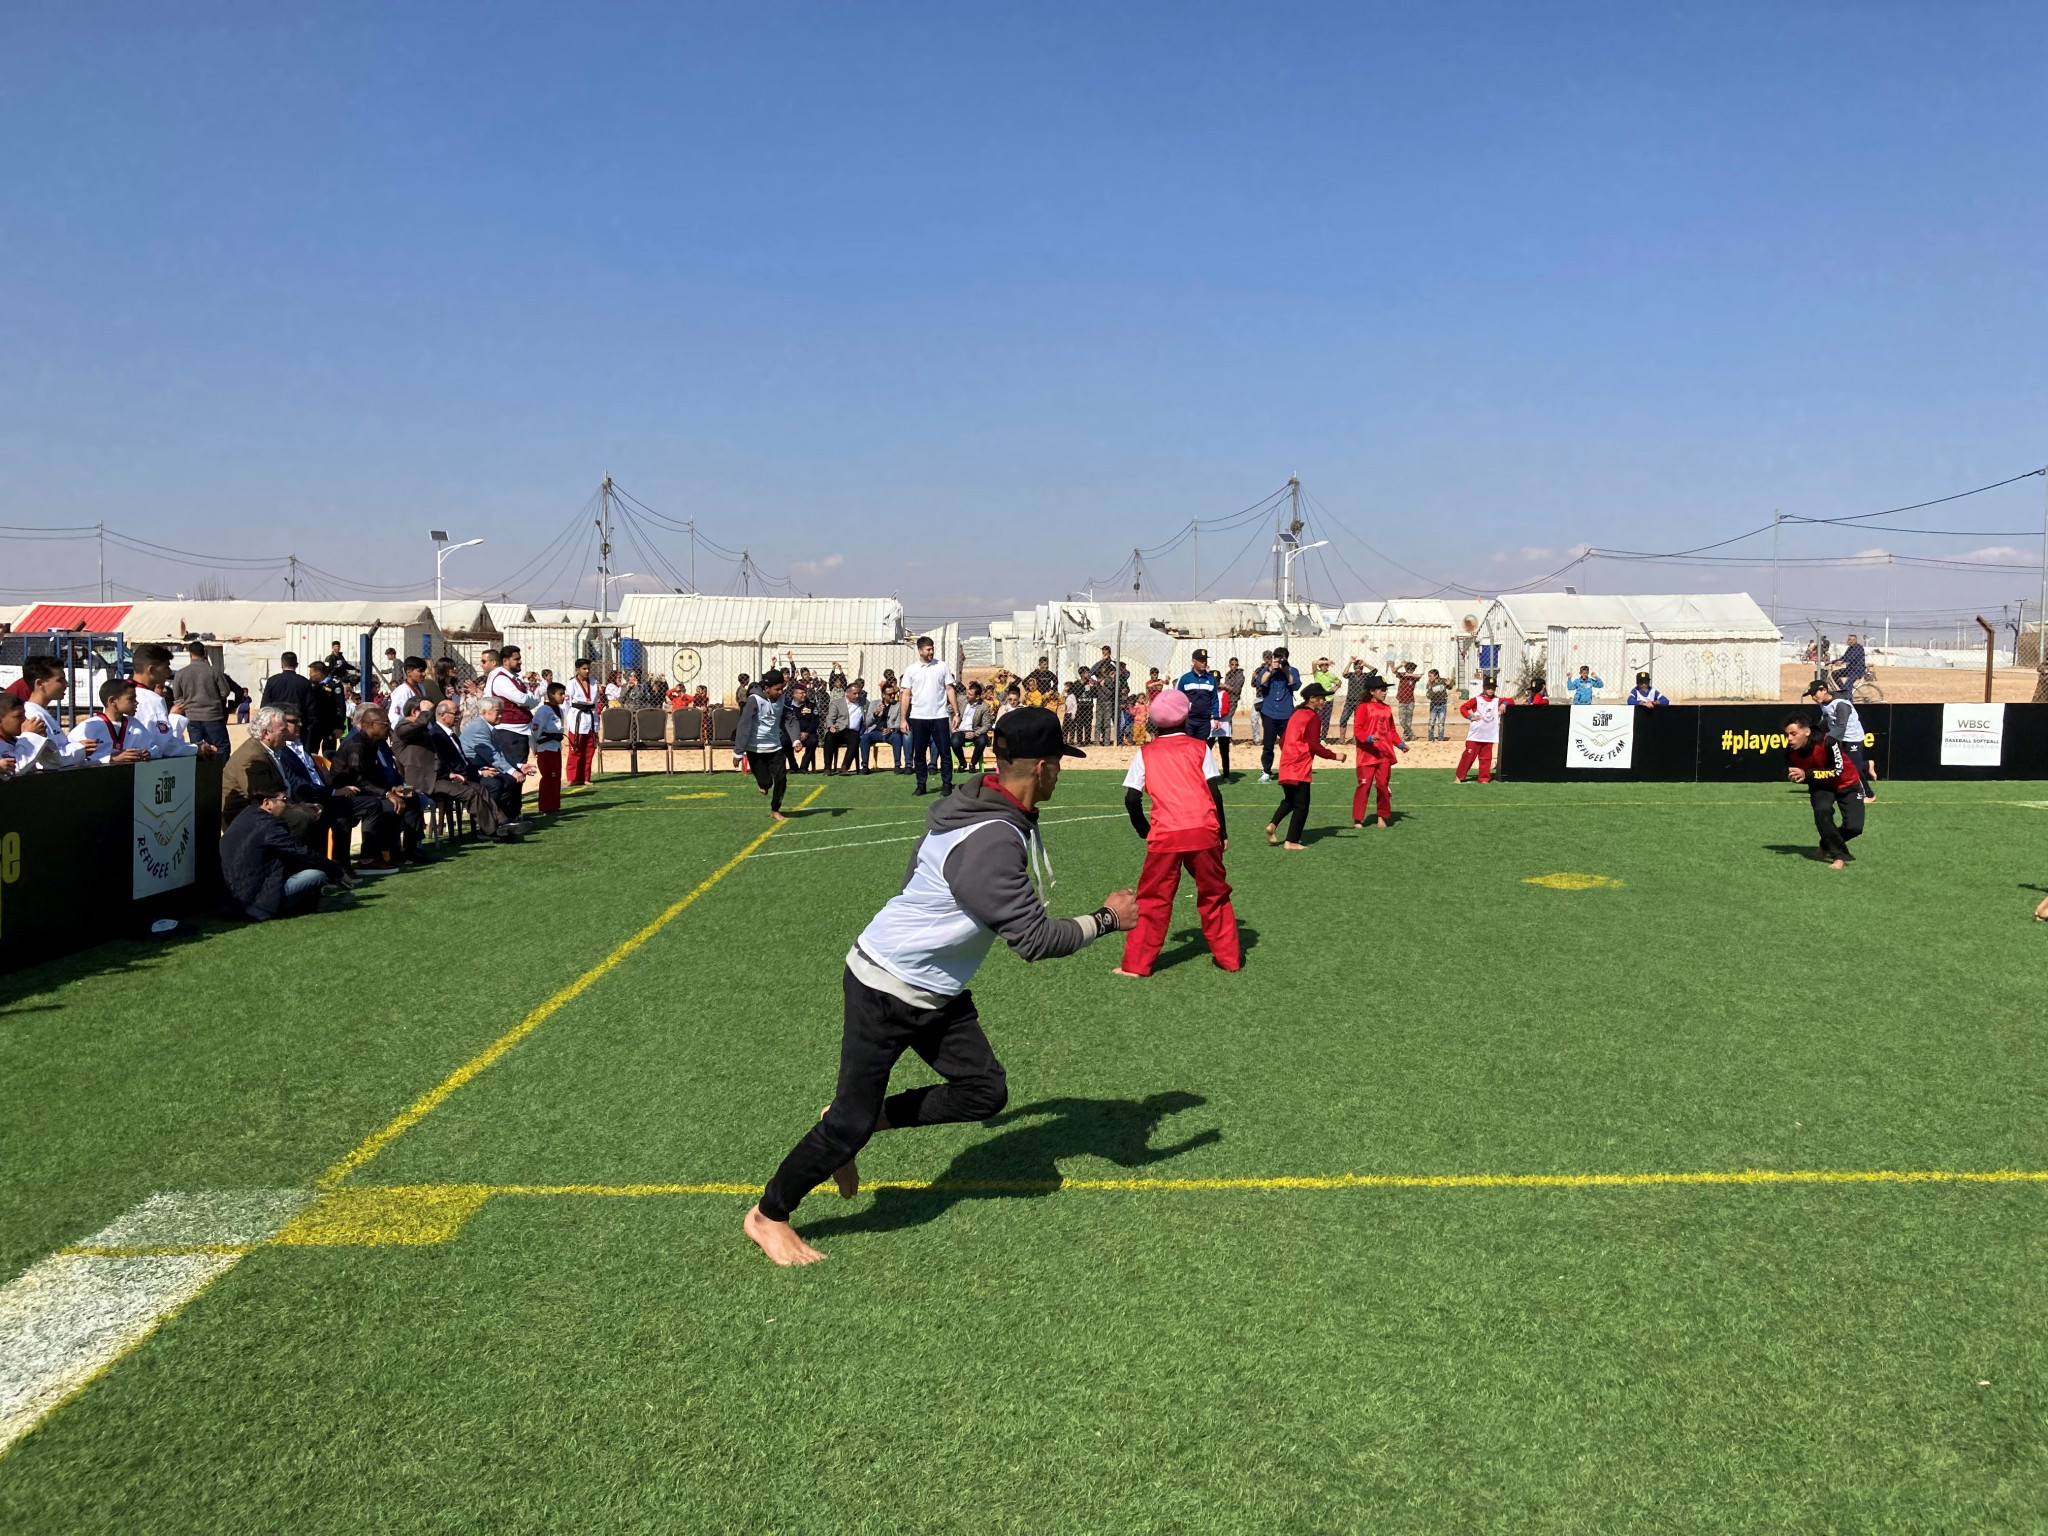 Baseball5 was displayed prominently on the first day of the Hopes and Dreams Sports Festival, and World Taekwondo seeks further International Federations as partners for the THF's work ©ITG